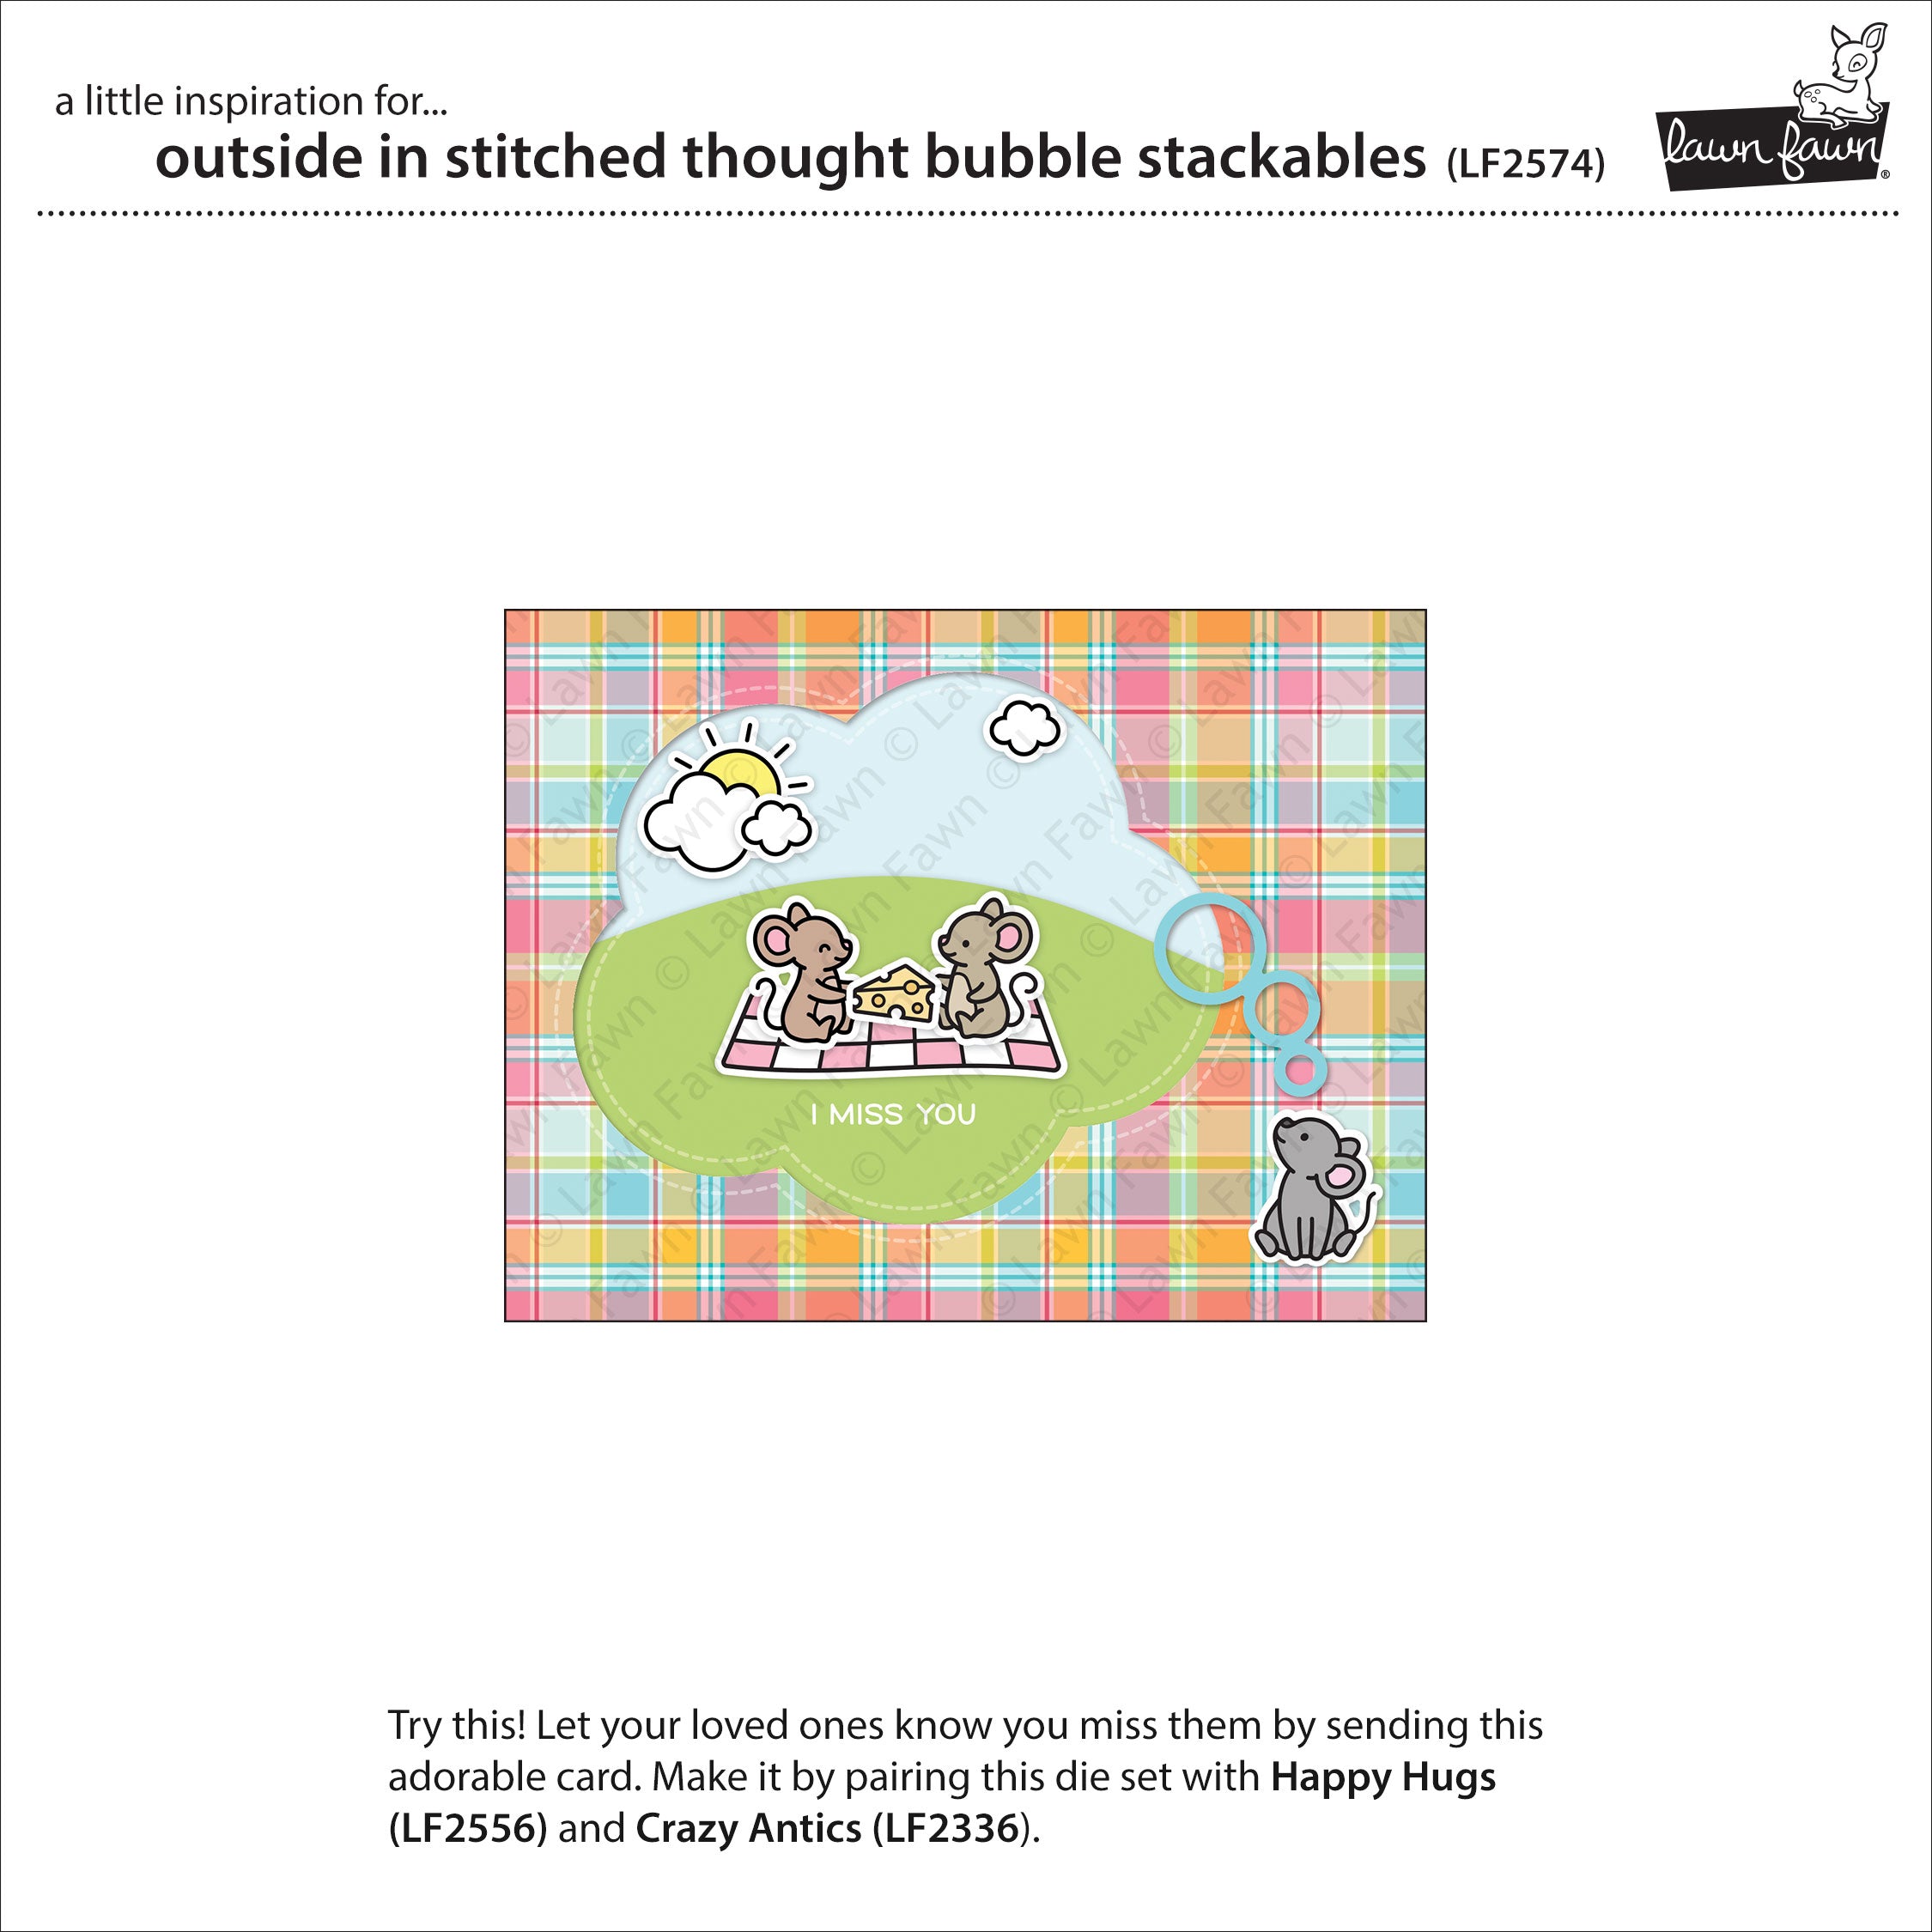 outside in stitched thought bubble stackables